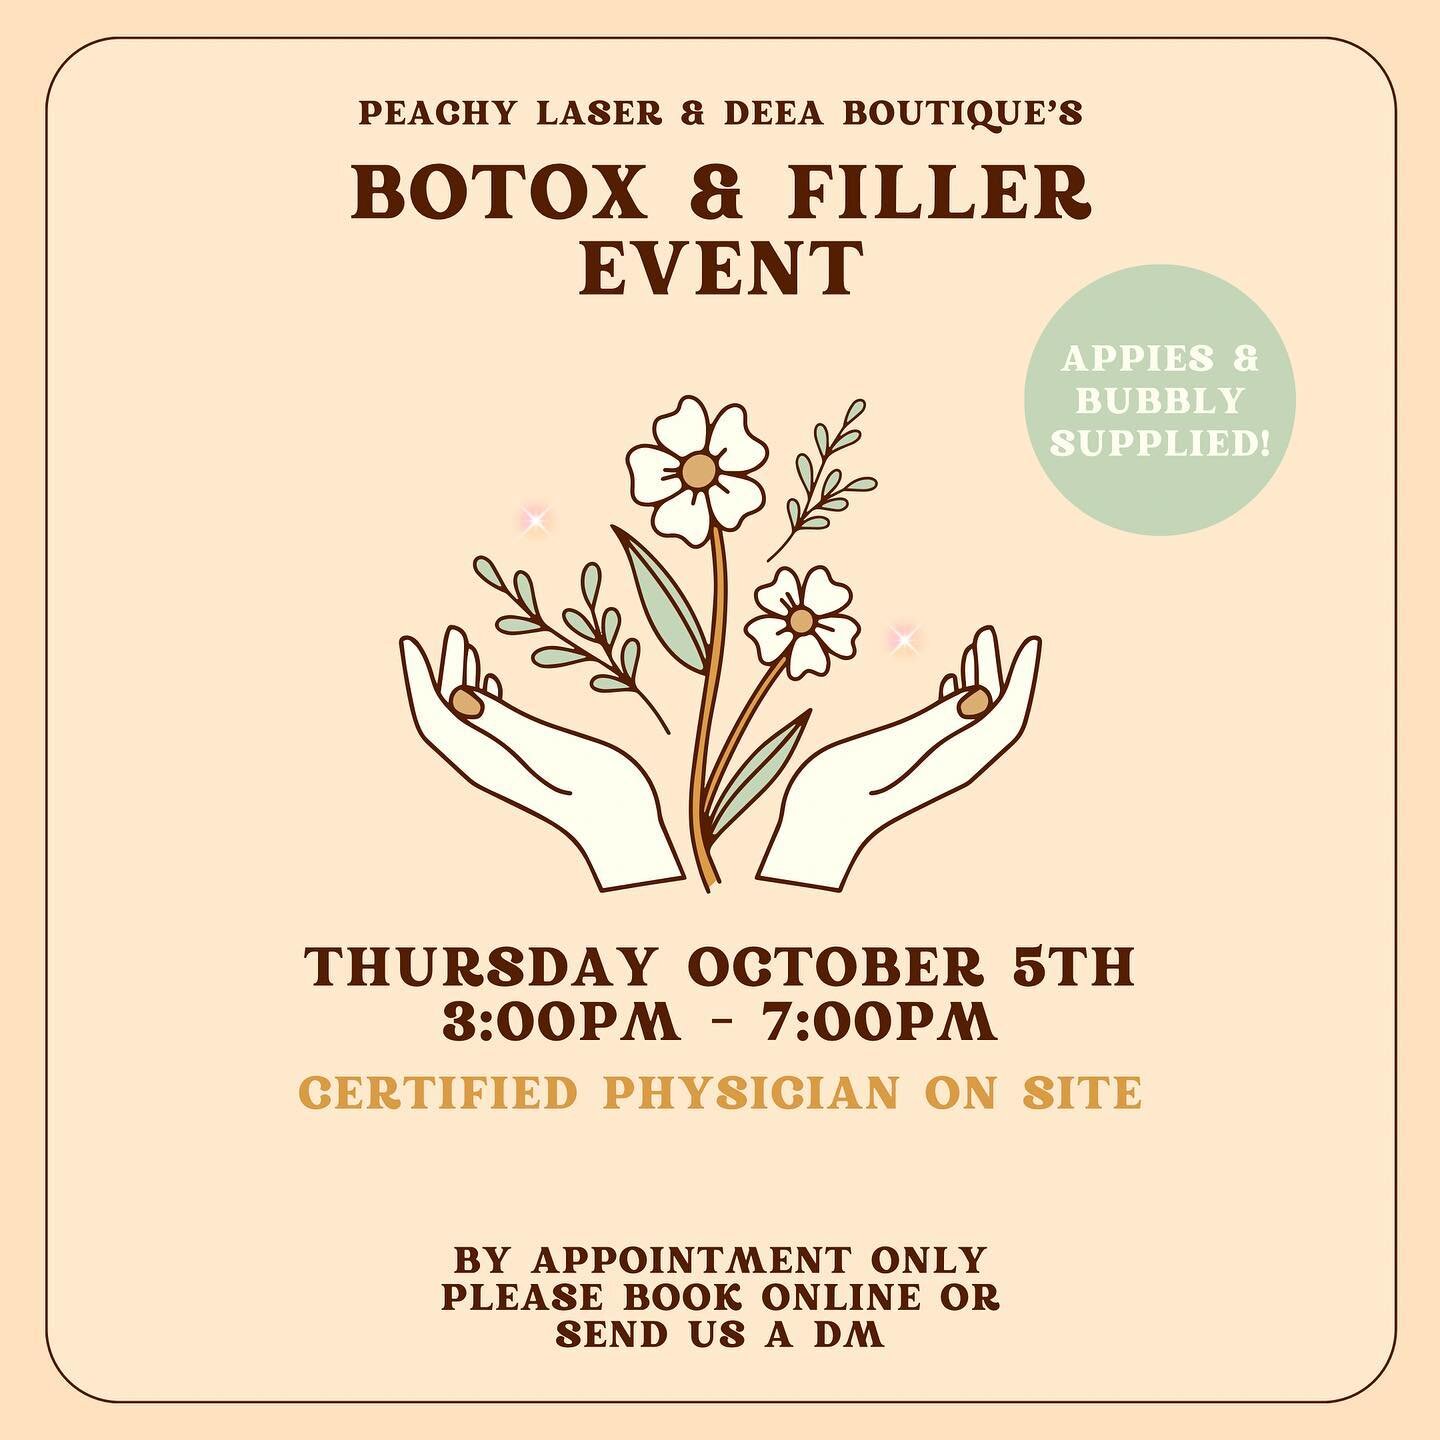 Our doctor will be in studio from 3pm - 7pm on Thursday October 5th! Make sure to book your spot now before appointments fill up ✨

Send us a dm with any questions / inquiries! 🤍

WWW.PEACHYLASERLOUNGE.COM

#botoxandfiller #botox #peachylaserlounge 